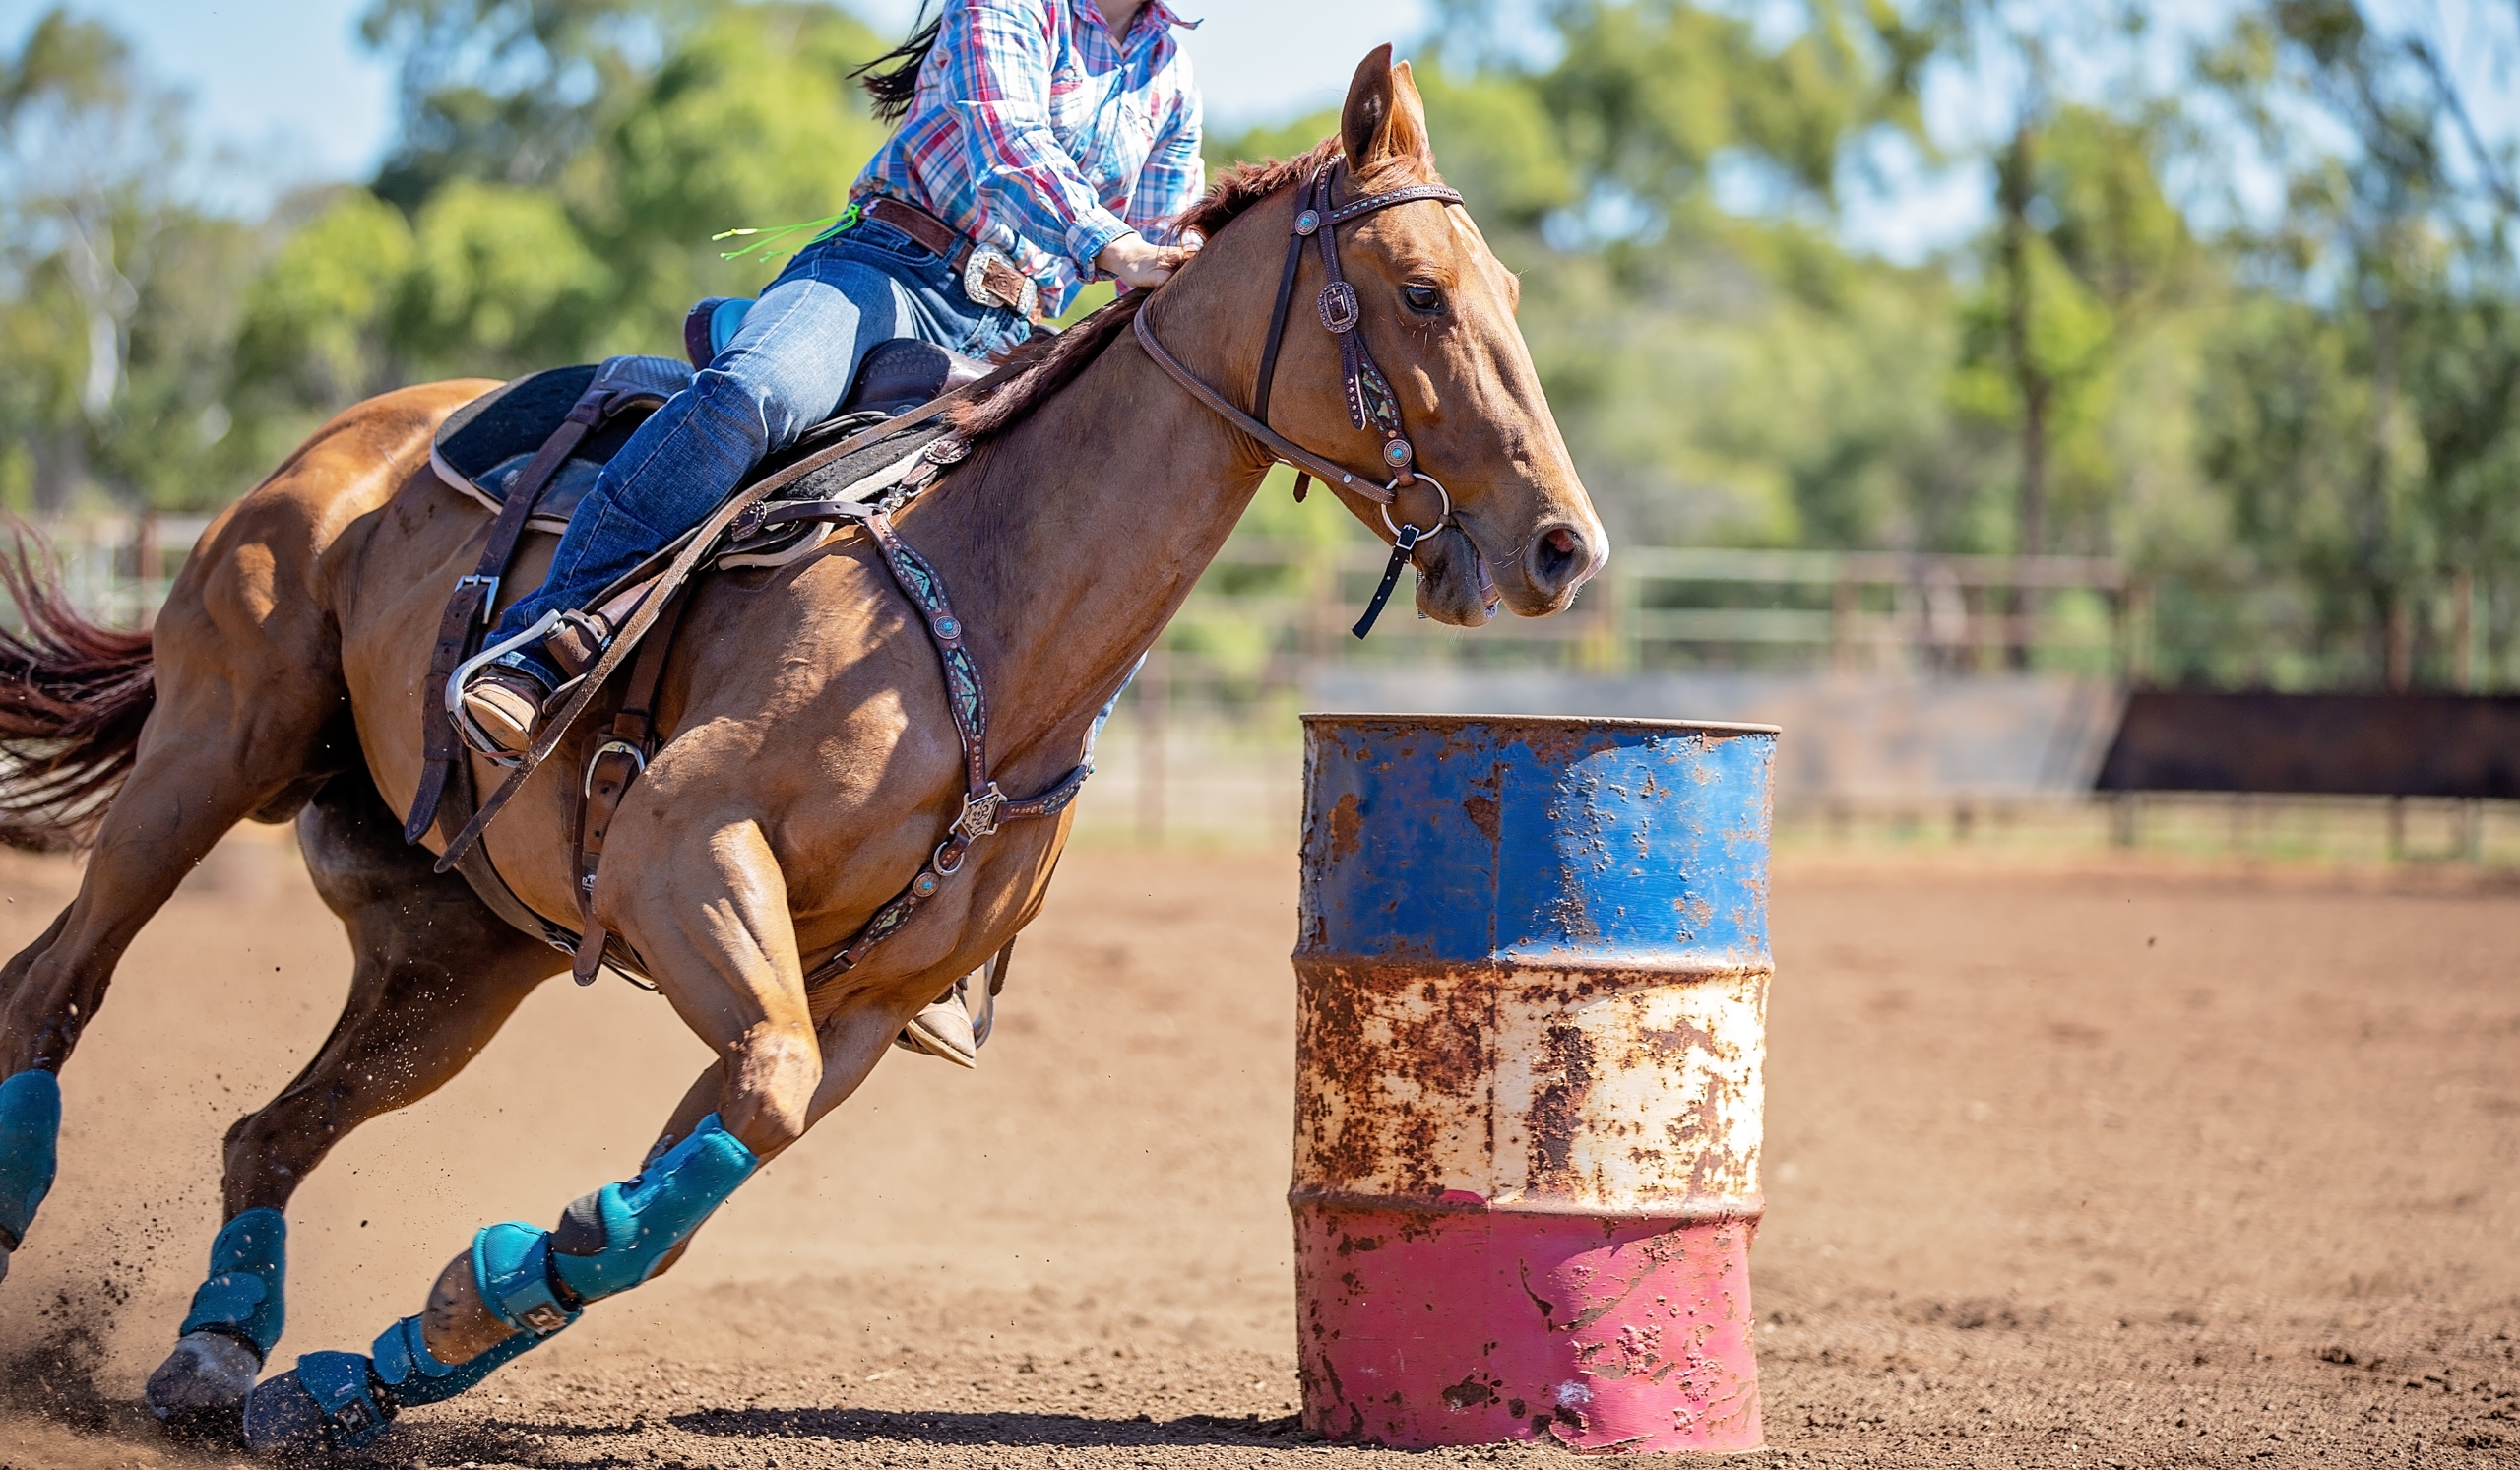 Close up of competitor on horseback making a figure eight turn in a barrel race at outback country rodeo